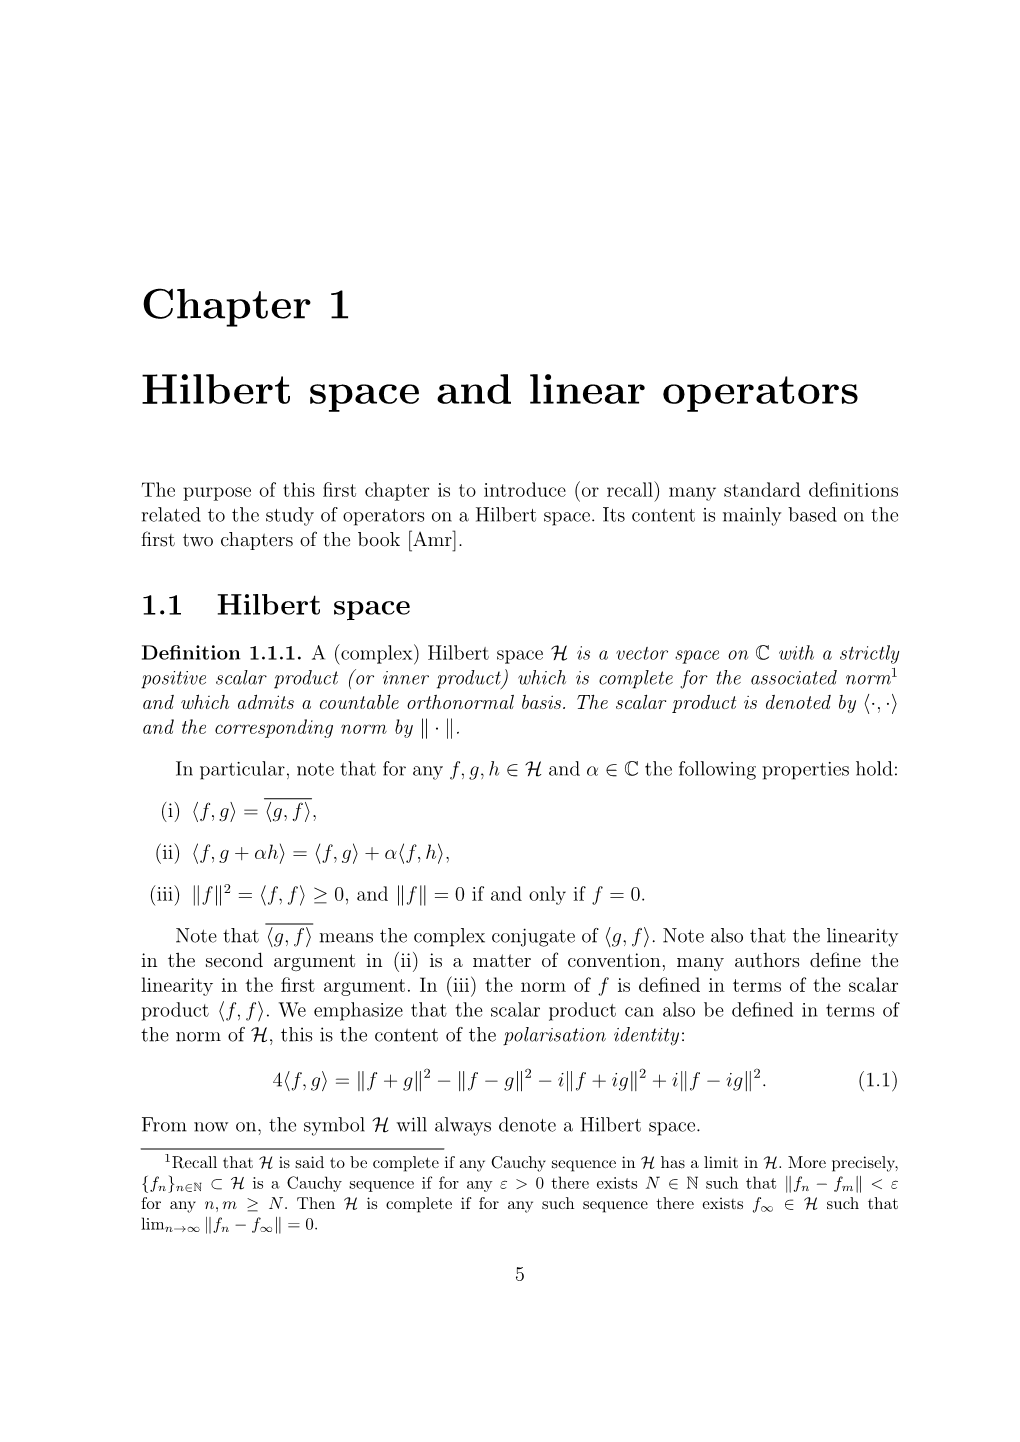 Chapter 1 Hilbert Space and Linear Operators